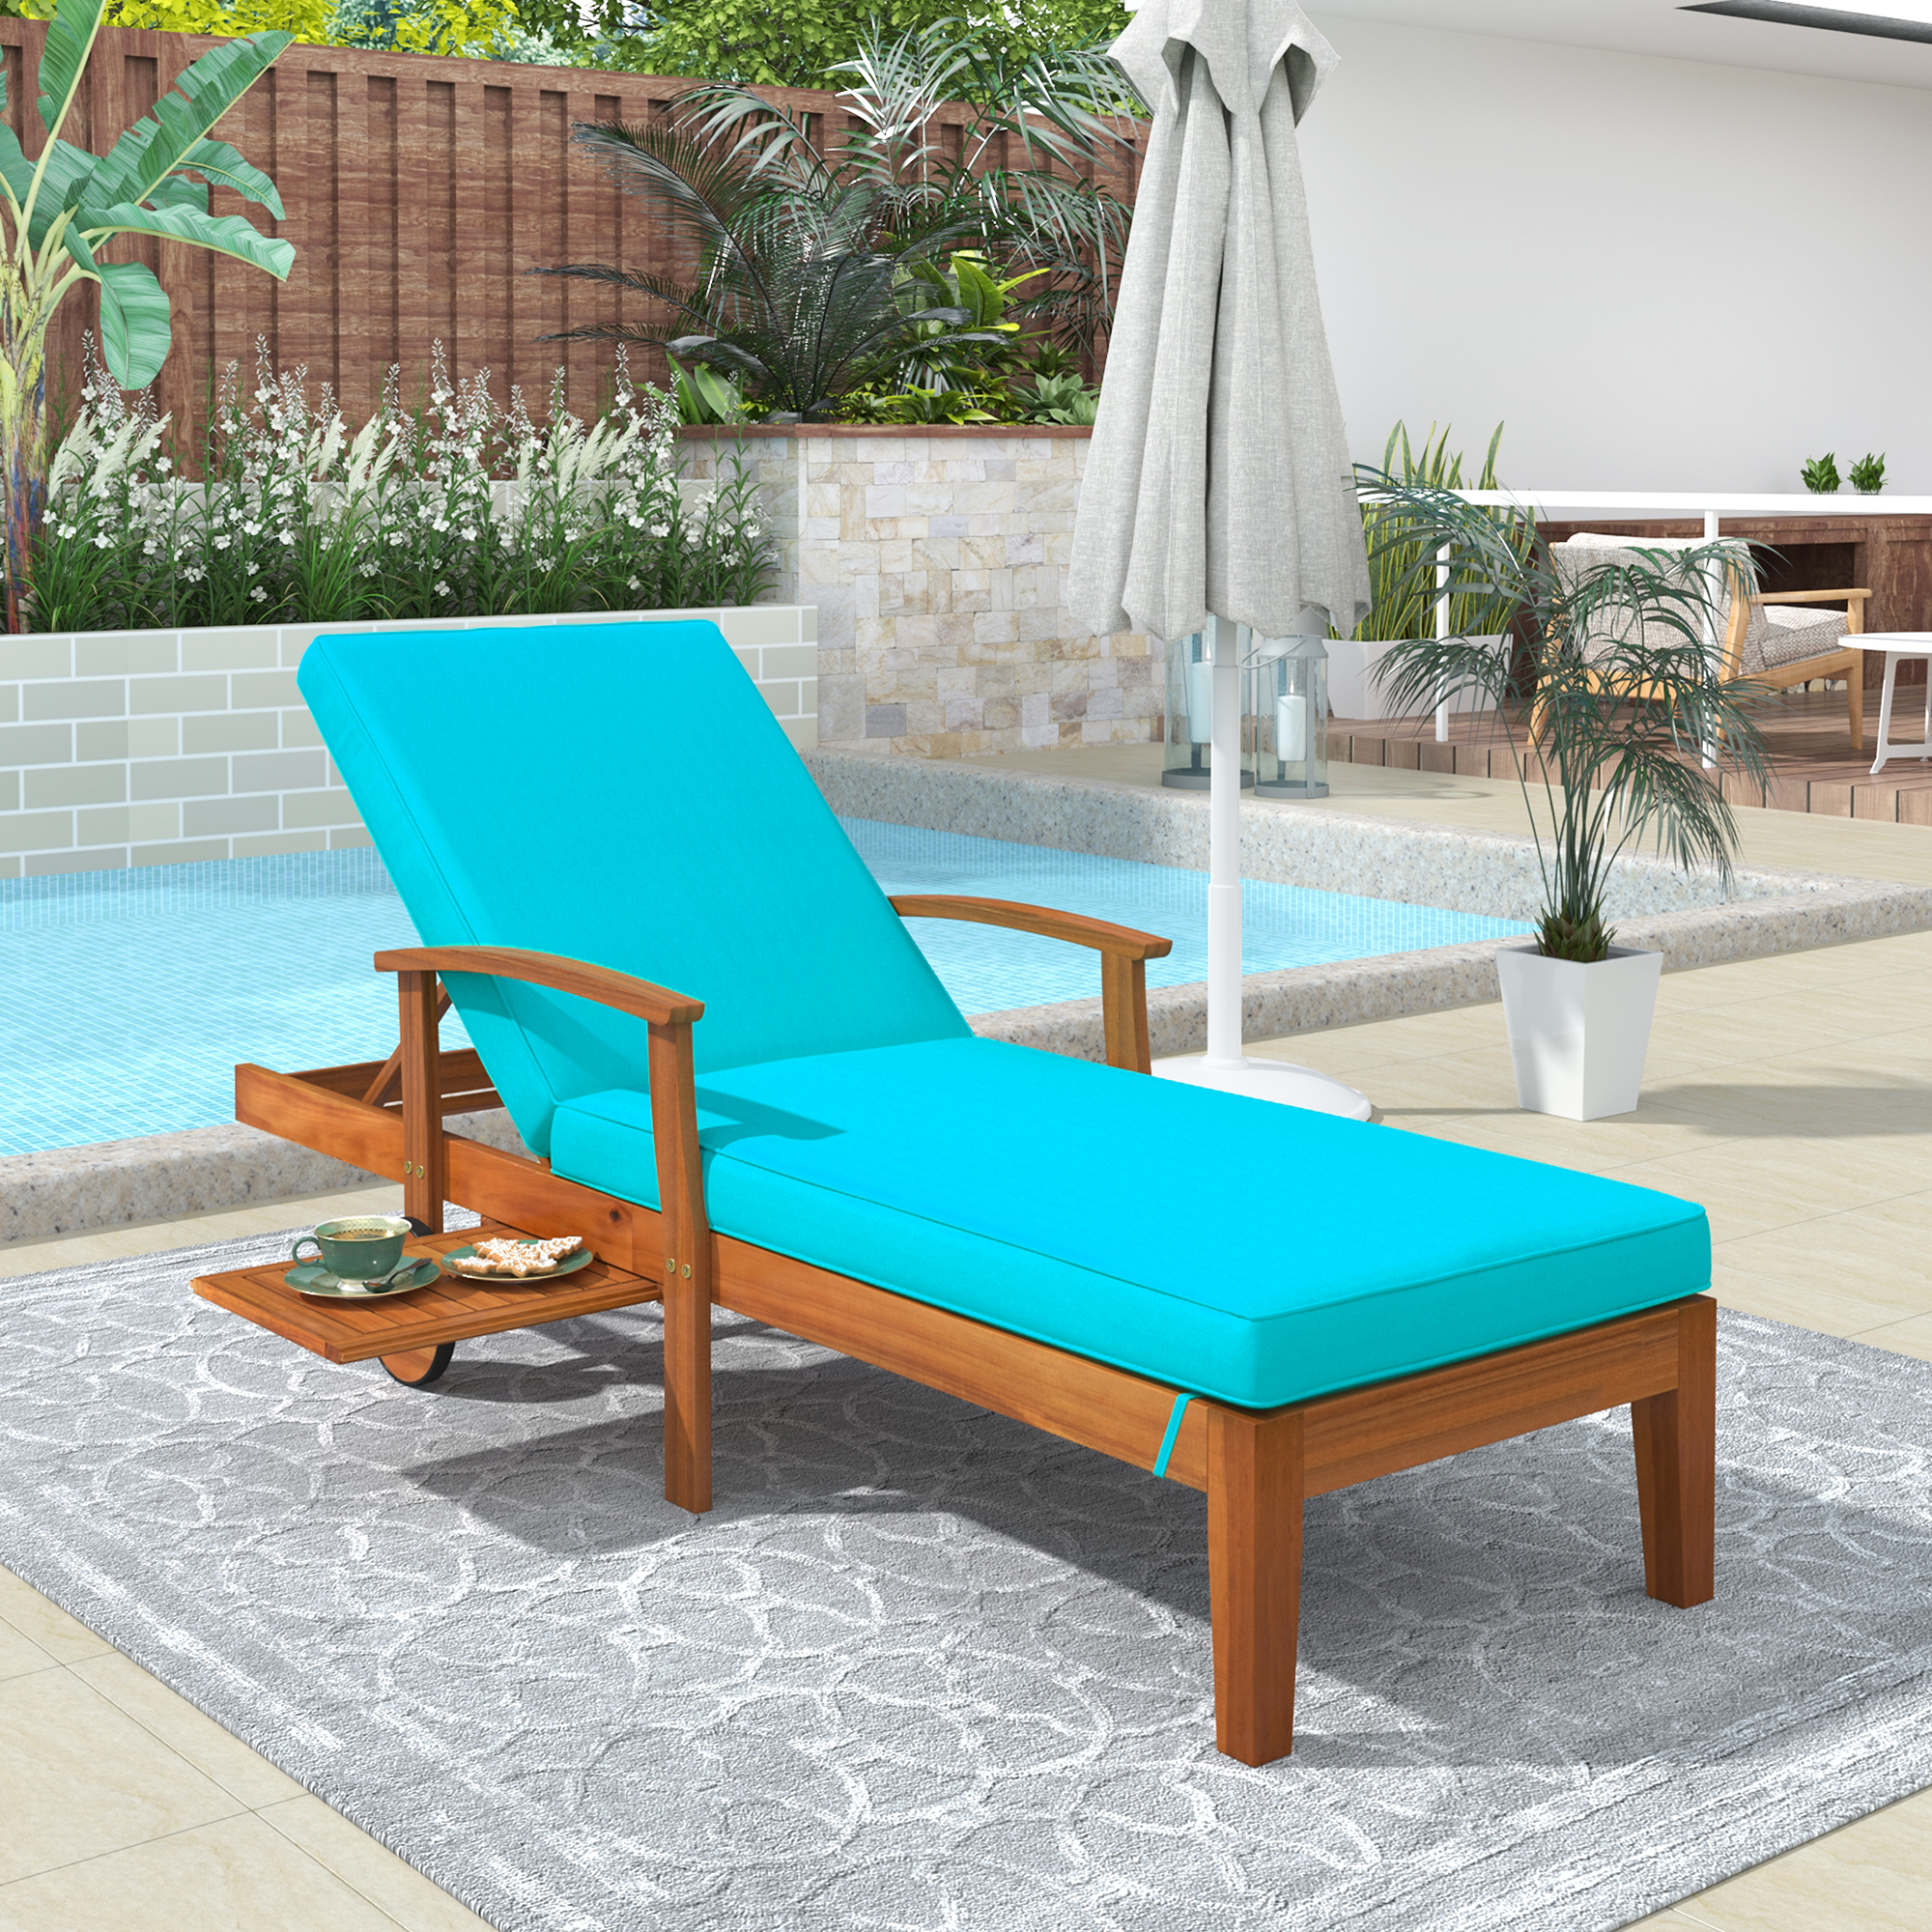 Sesslife Outdoor Solid Wood Chaise Lounge, Patio Brown Finish Reclining Chair Furniture Beach Pool Adjustable Backrest Recliners with Blue Cushion - image 2 of 10